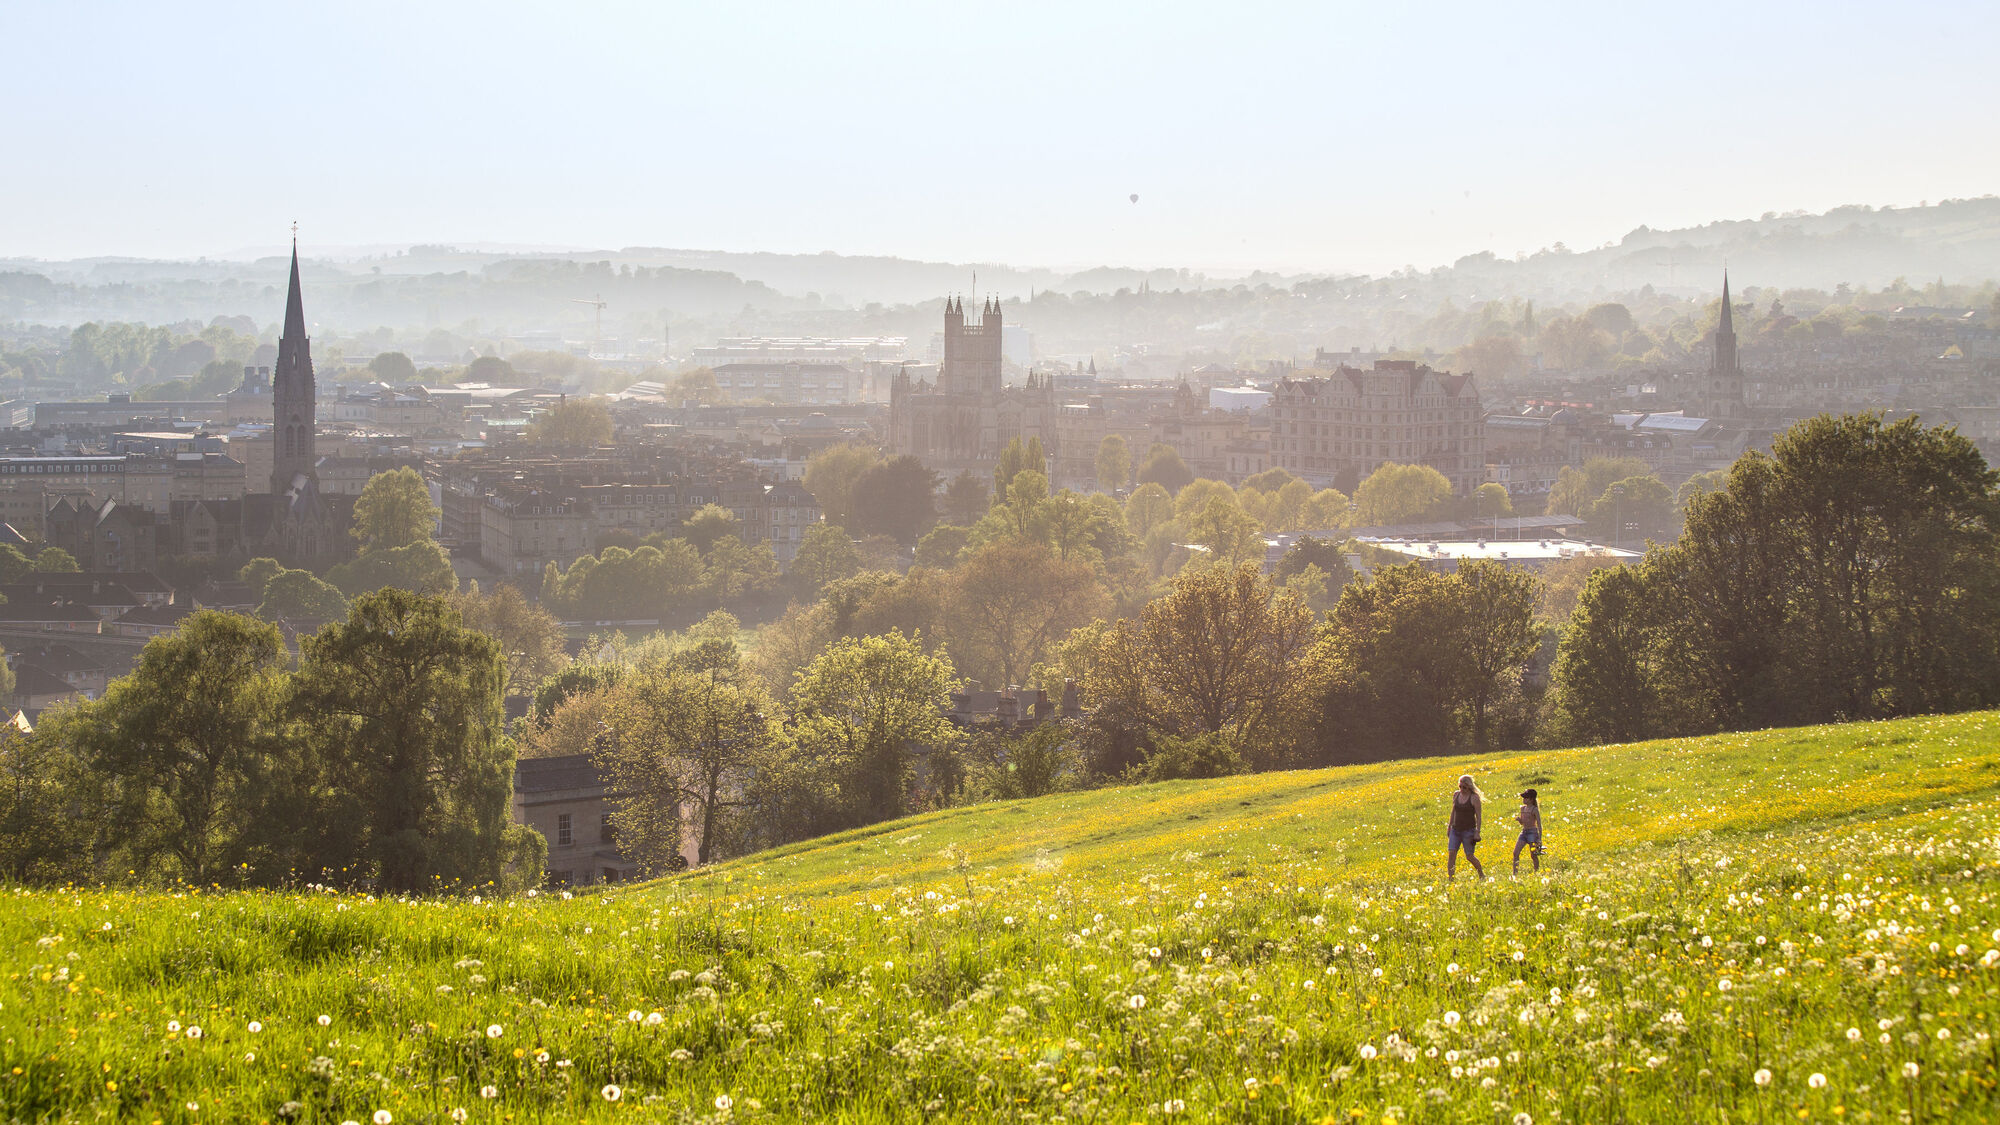 Re-thinking the landscape and public realm of Bath